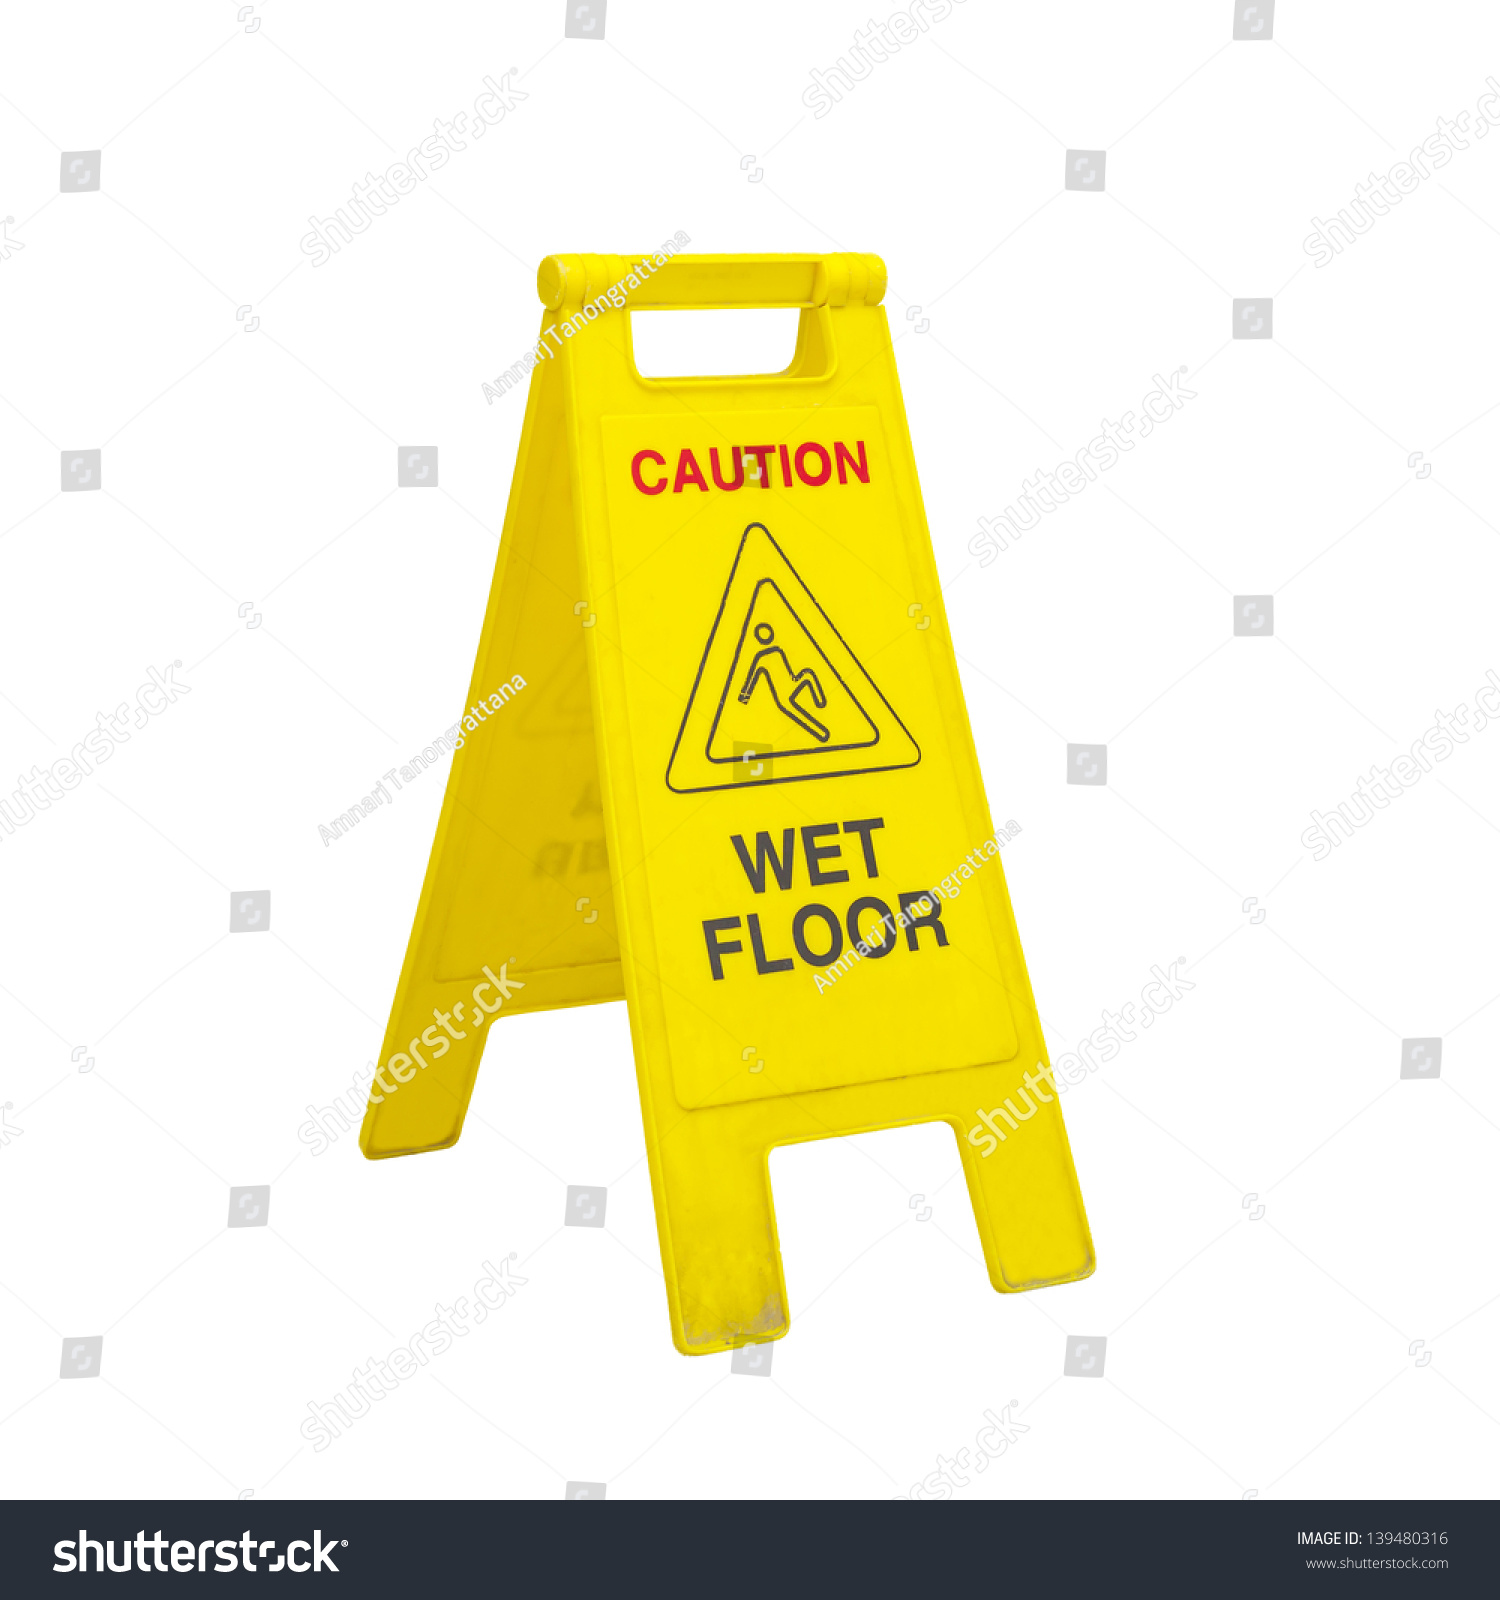 caution wet floor signs in the office room  #139480316